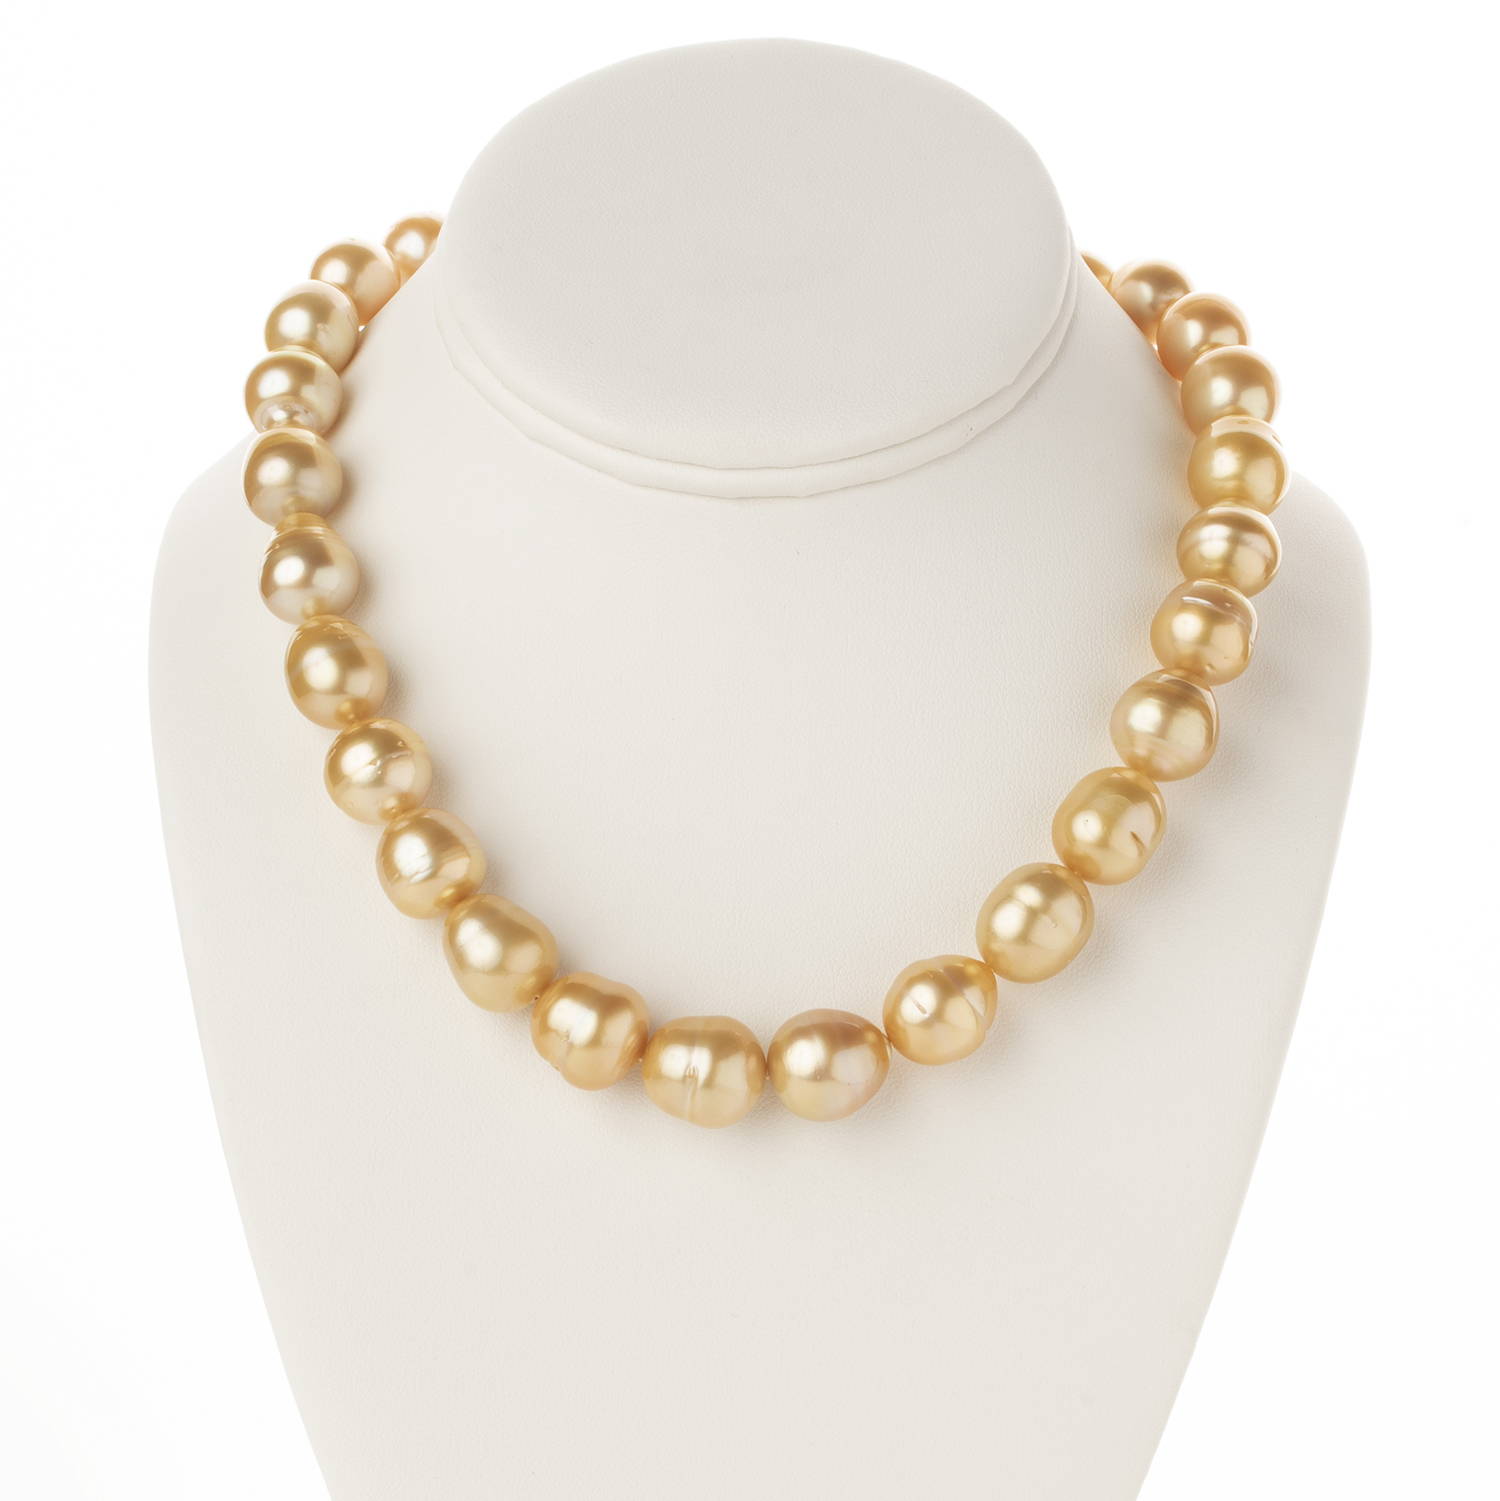 Baroque Golden South Sea Pearl Necklace on White Jewelry But